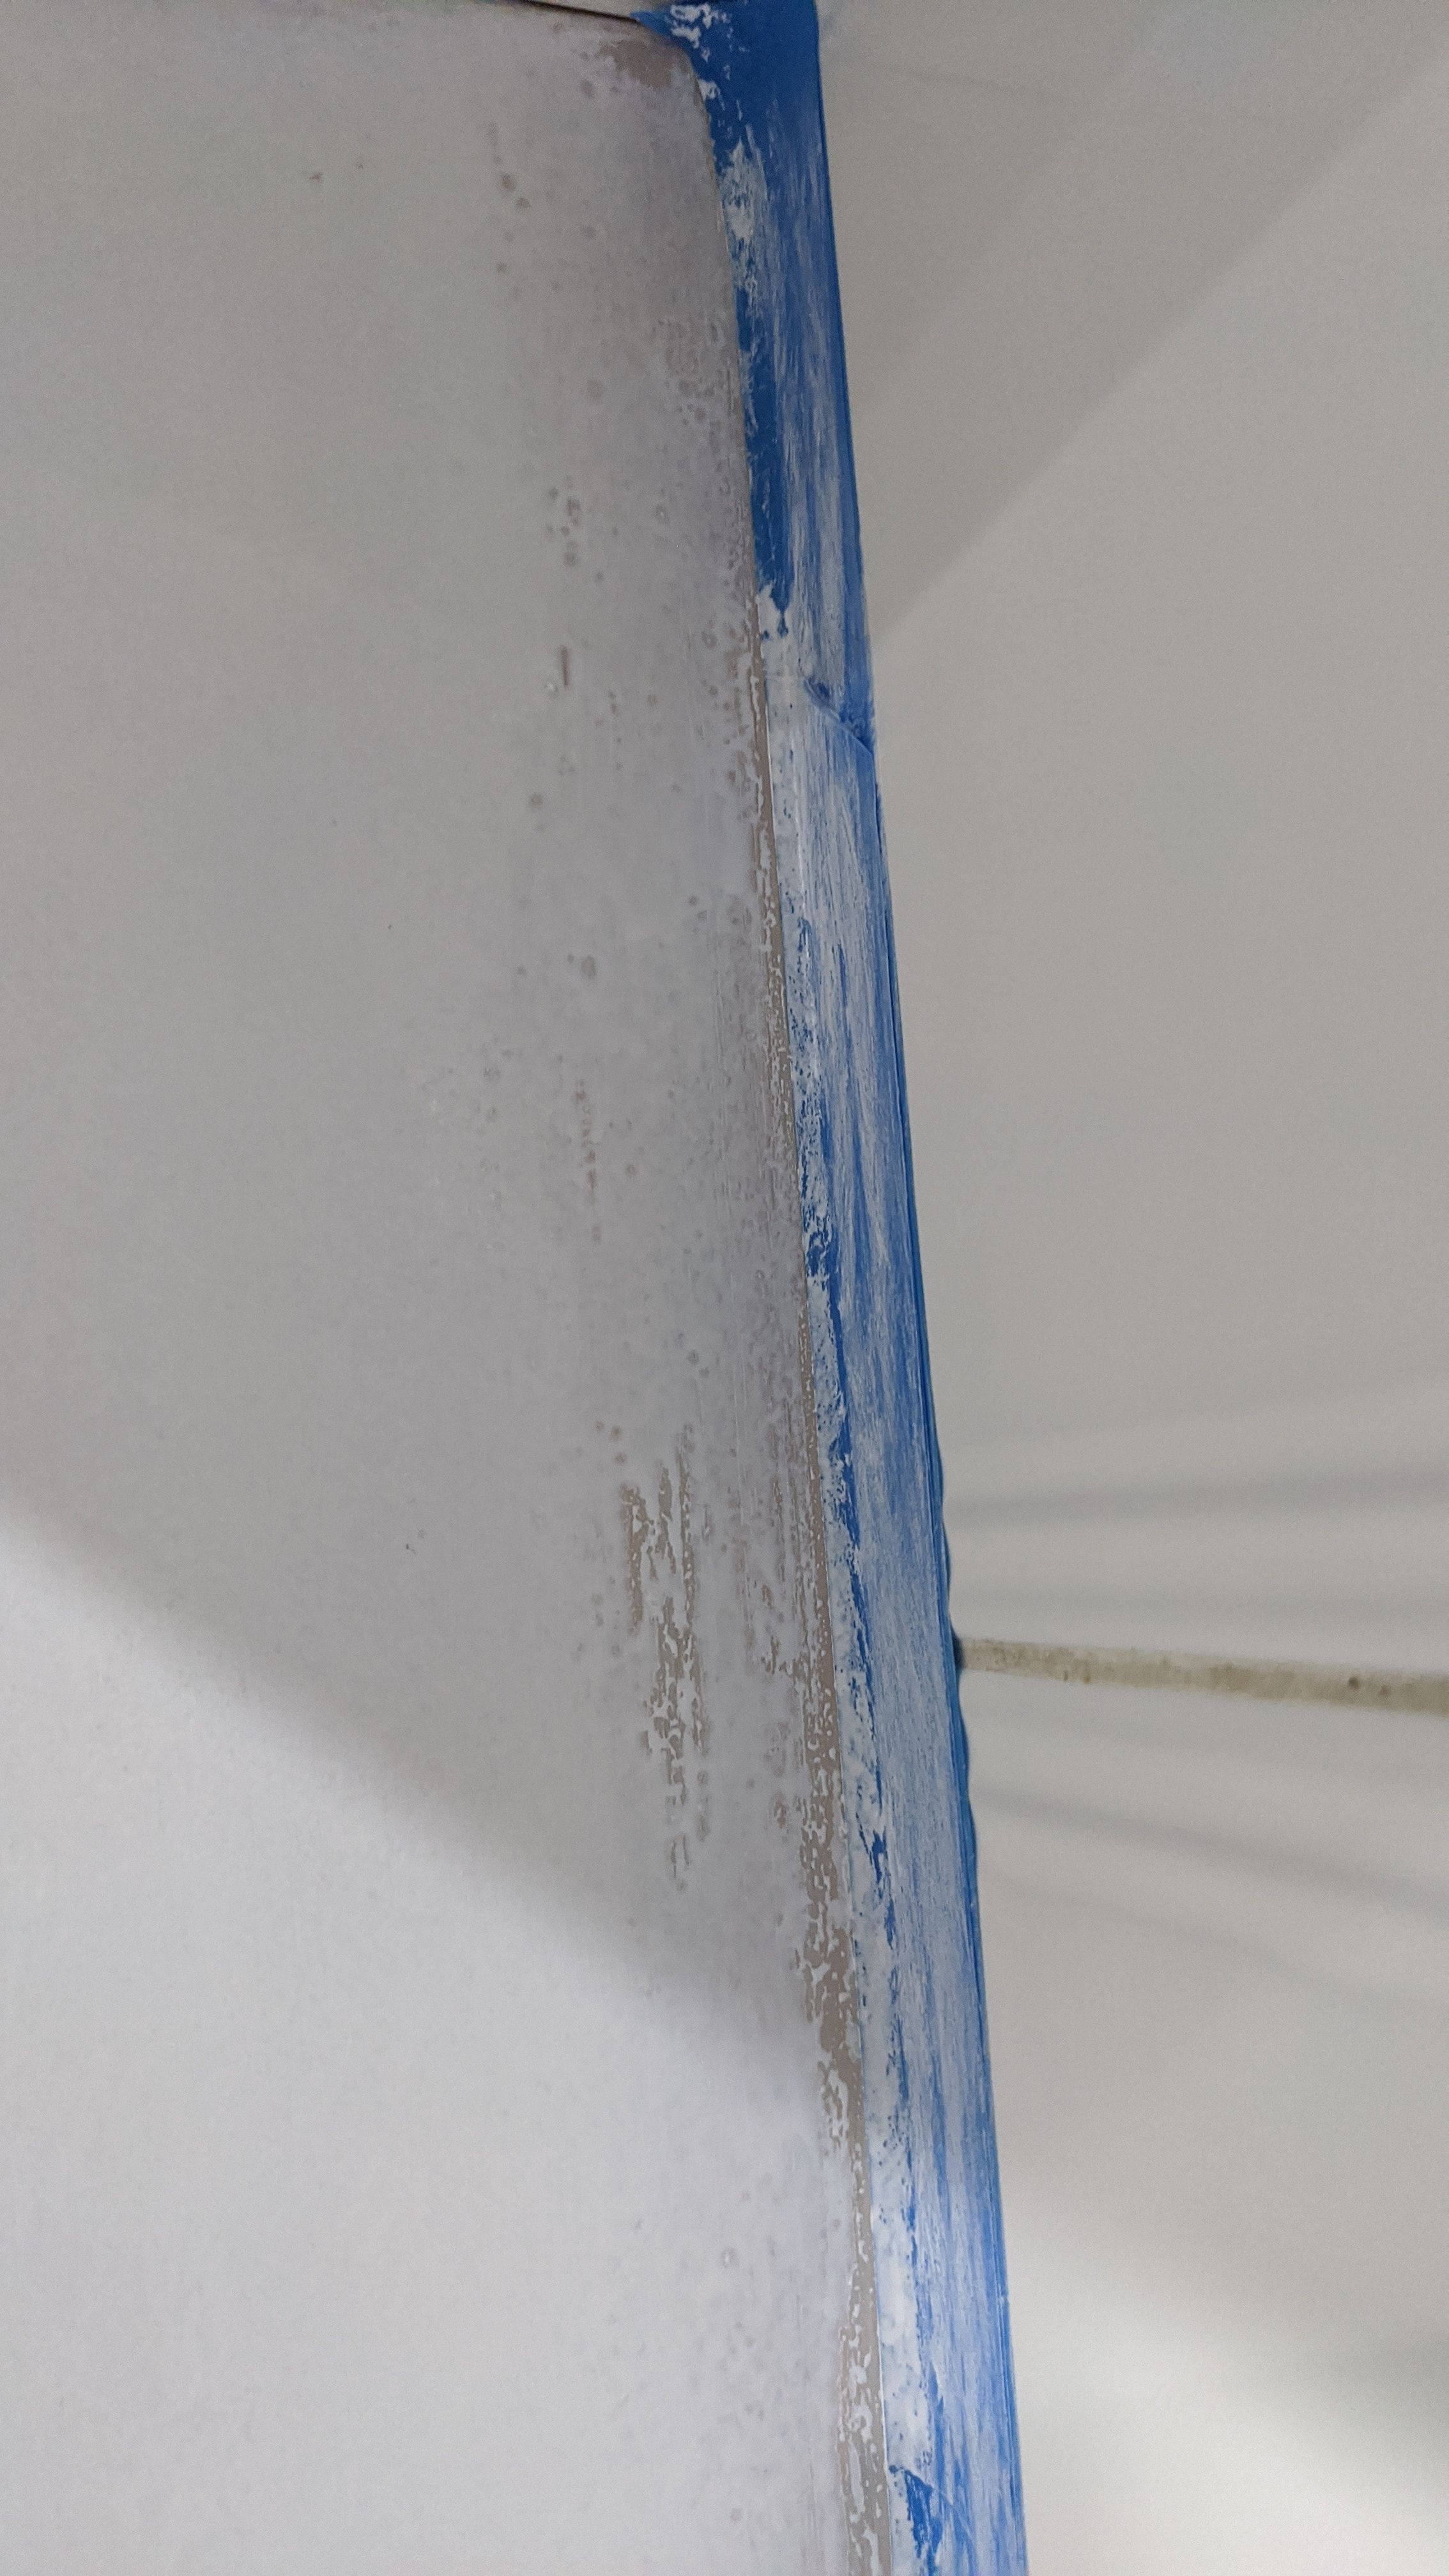 Paint not sticking to cabinet | Bunnings Workshop community